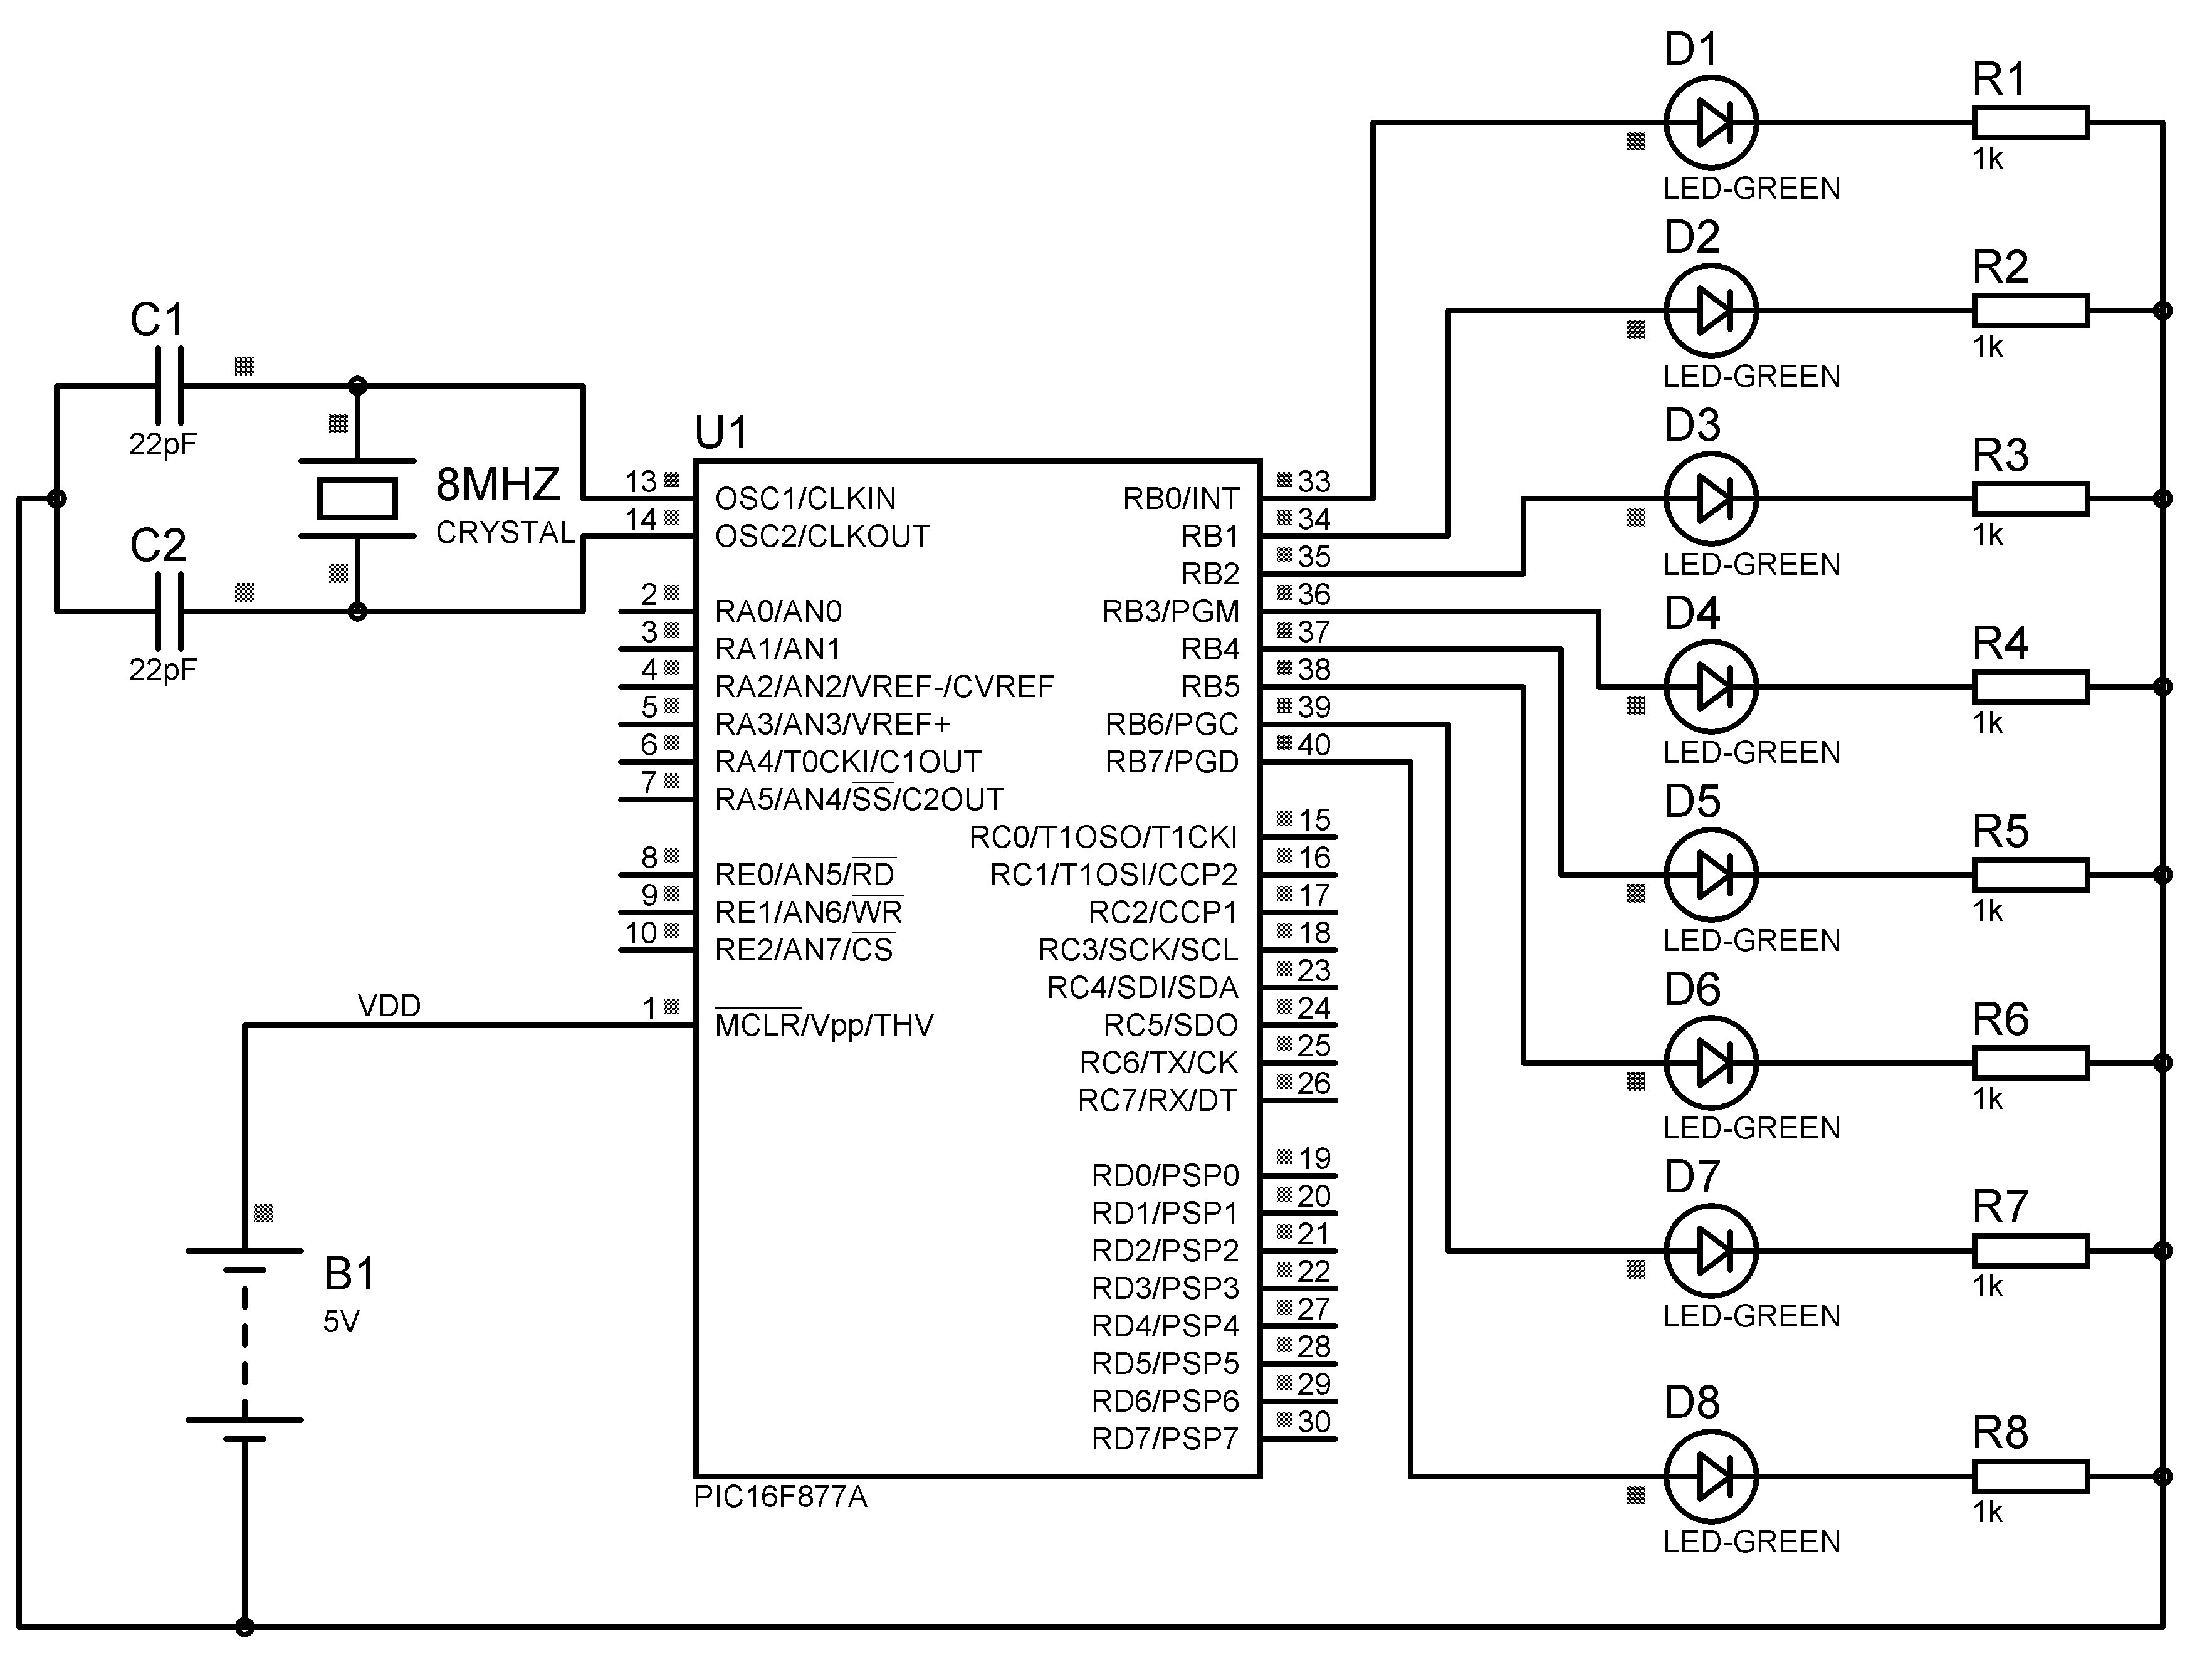 Led Chaser Using Pic Microcontroller Mikroc Circuit Diagram